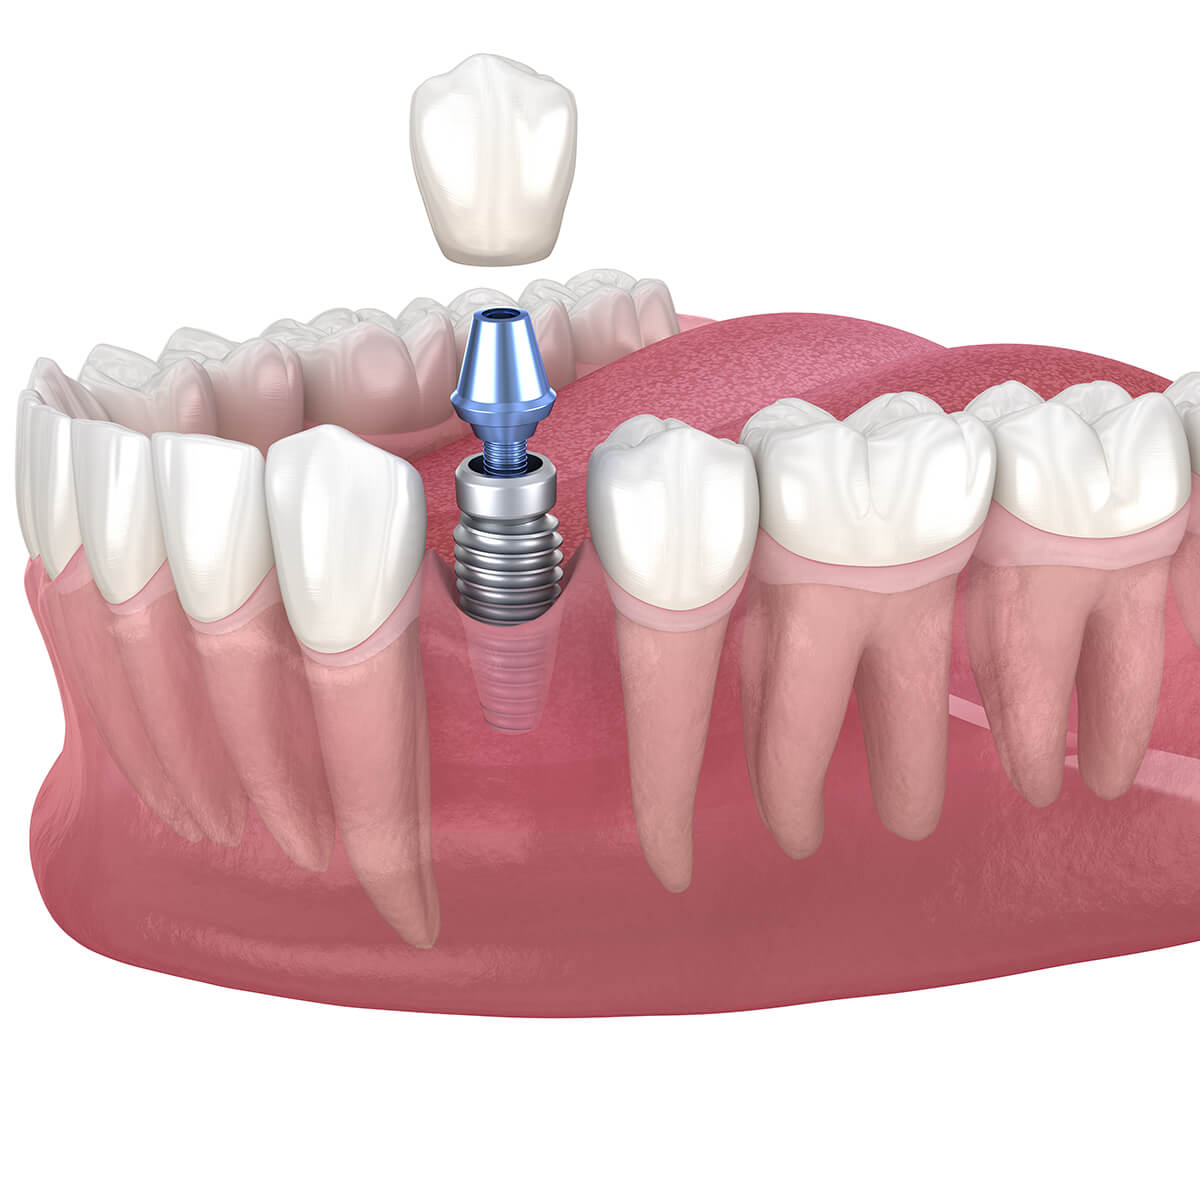 Find an Implant Dentist Near Me Fort Lauderdale FL Area